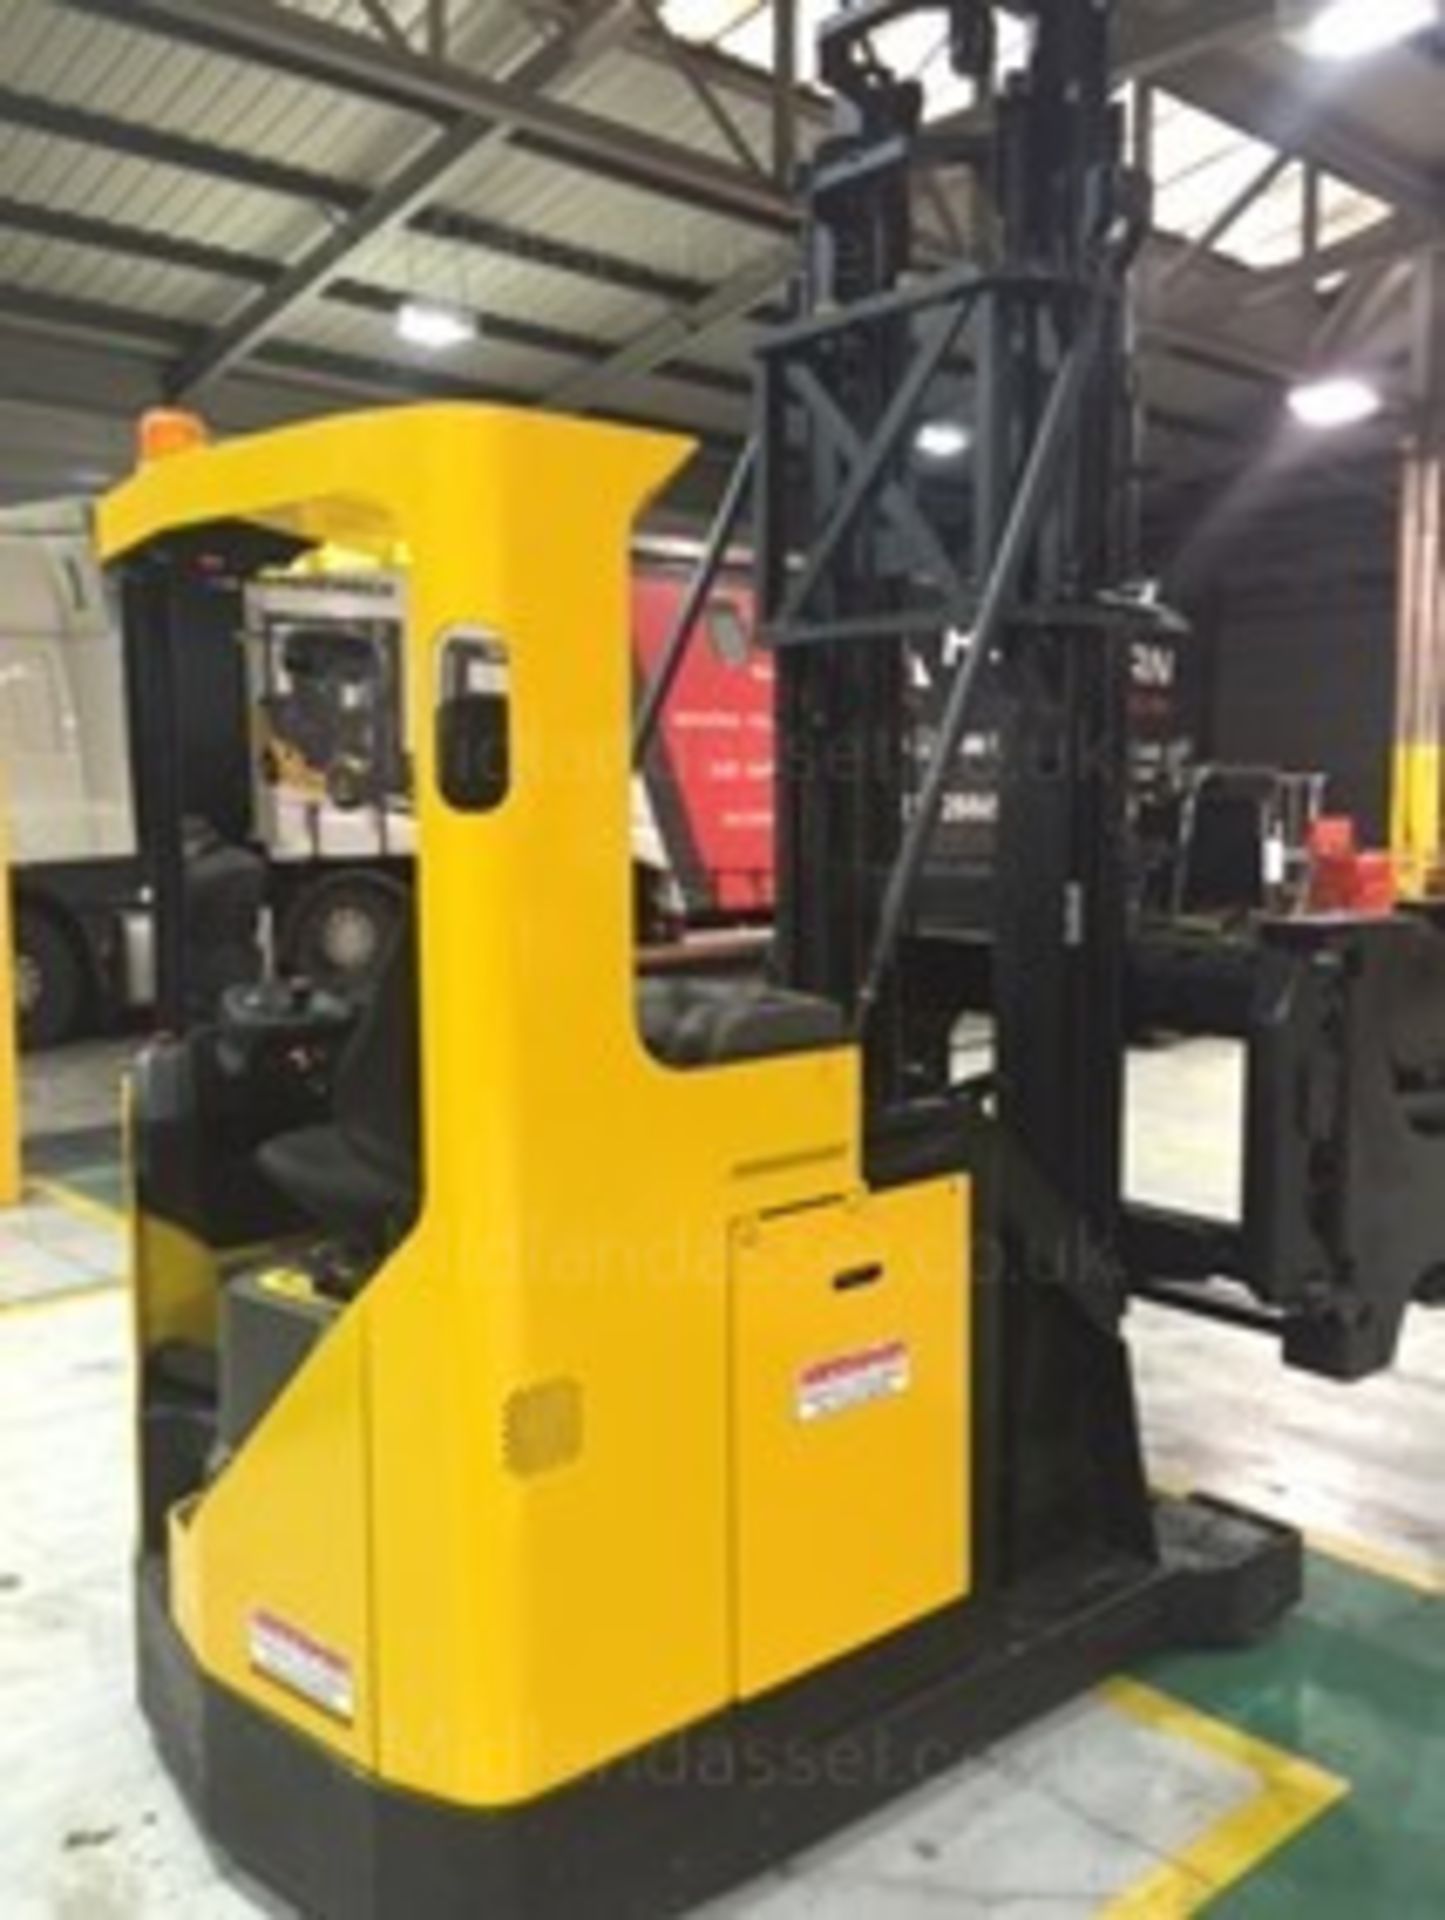 TOYOTA/BT VRE150 ELECTRIC TRI-LATERAL REACH TRUCK - Image 3 of 6